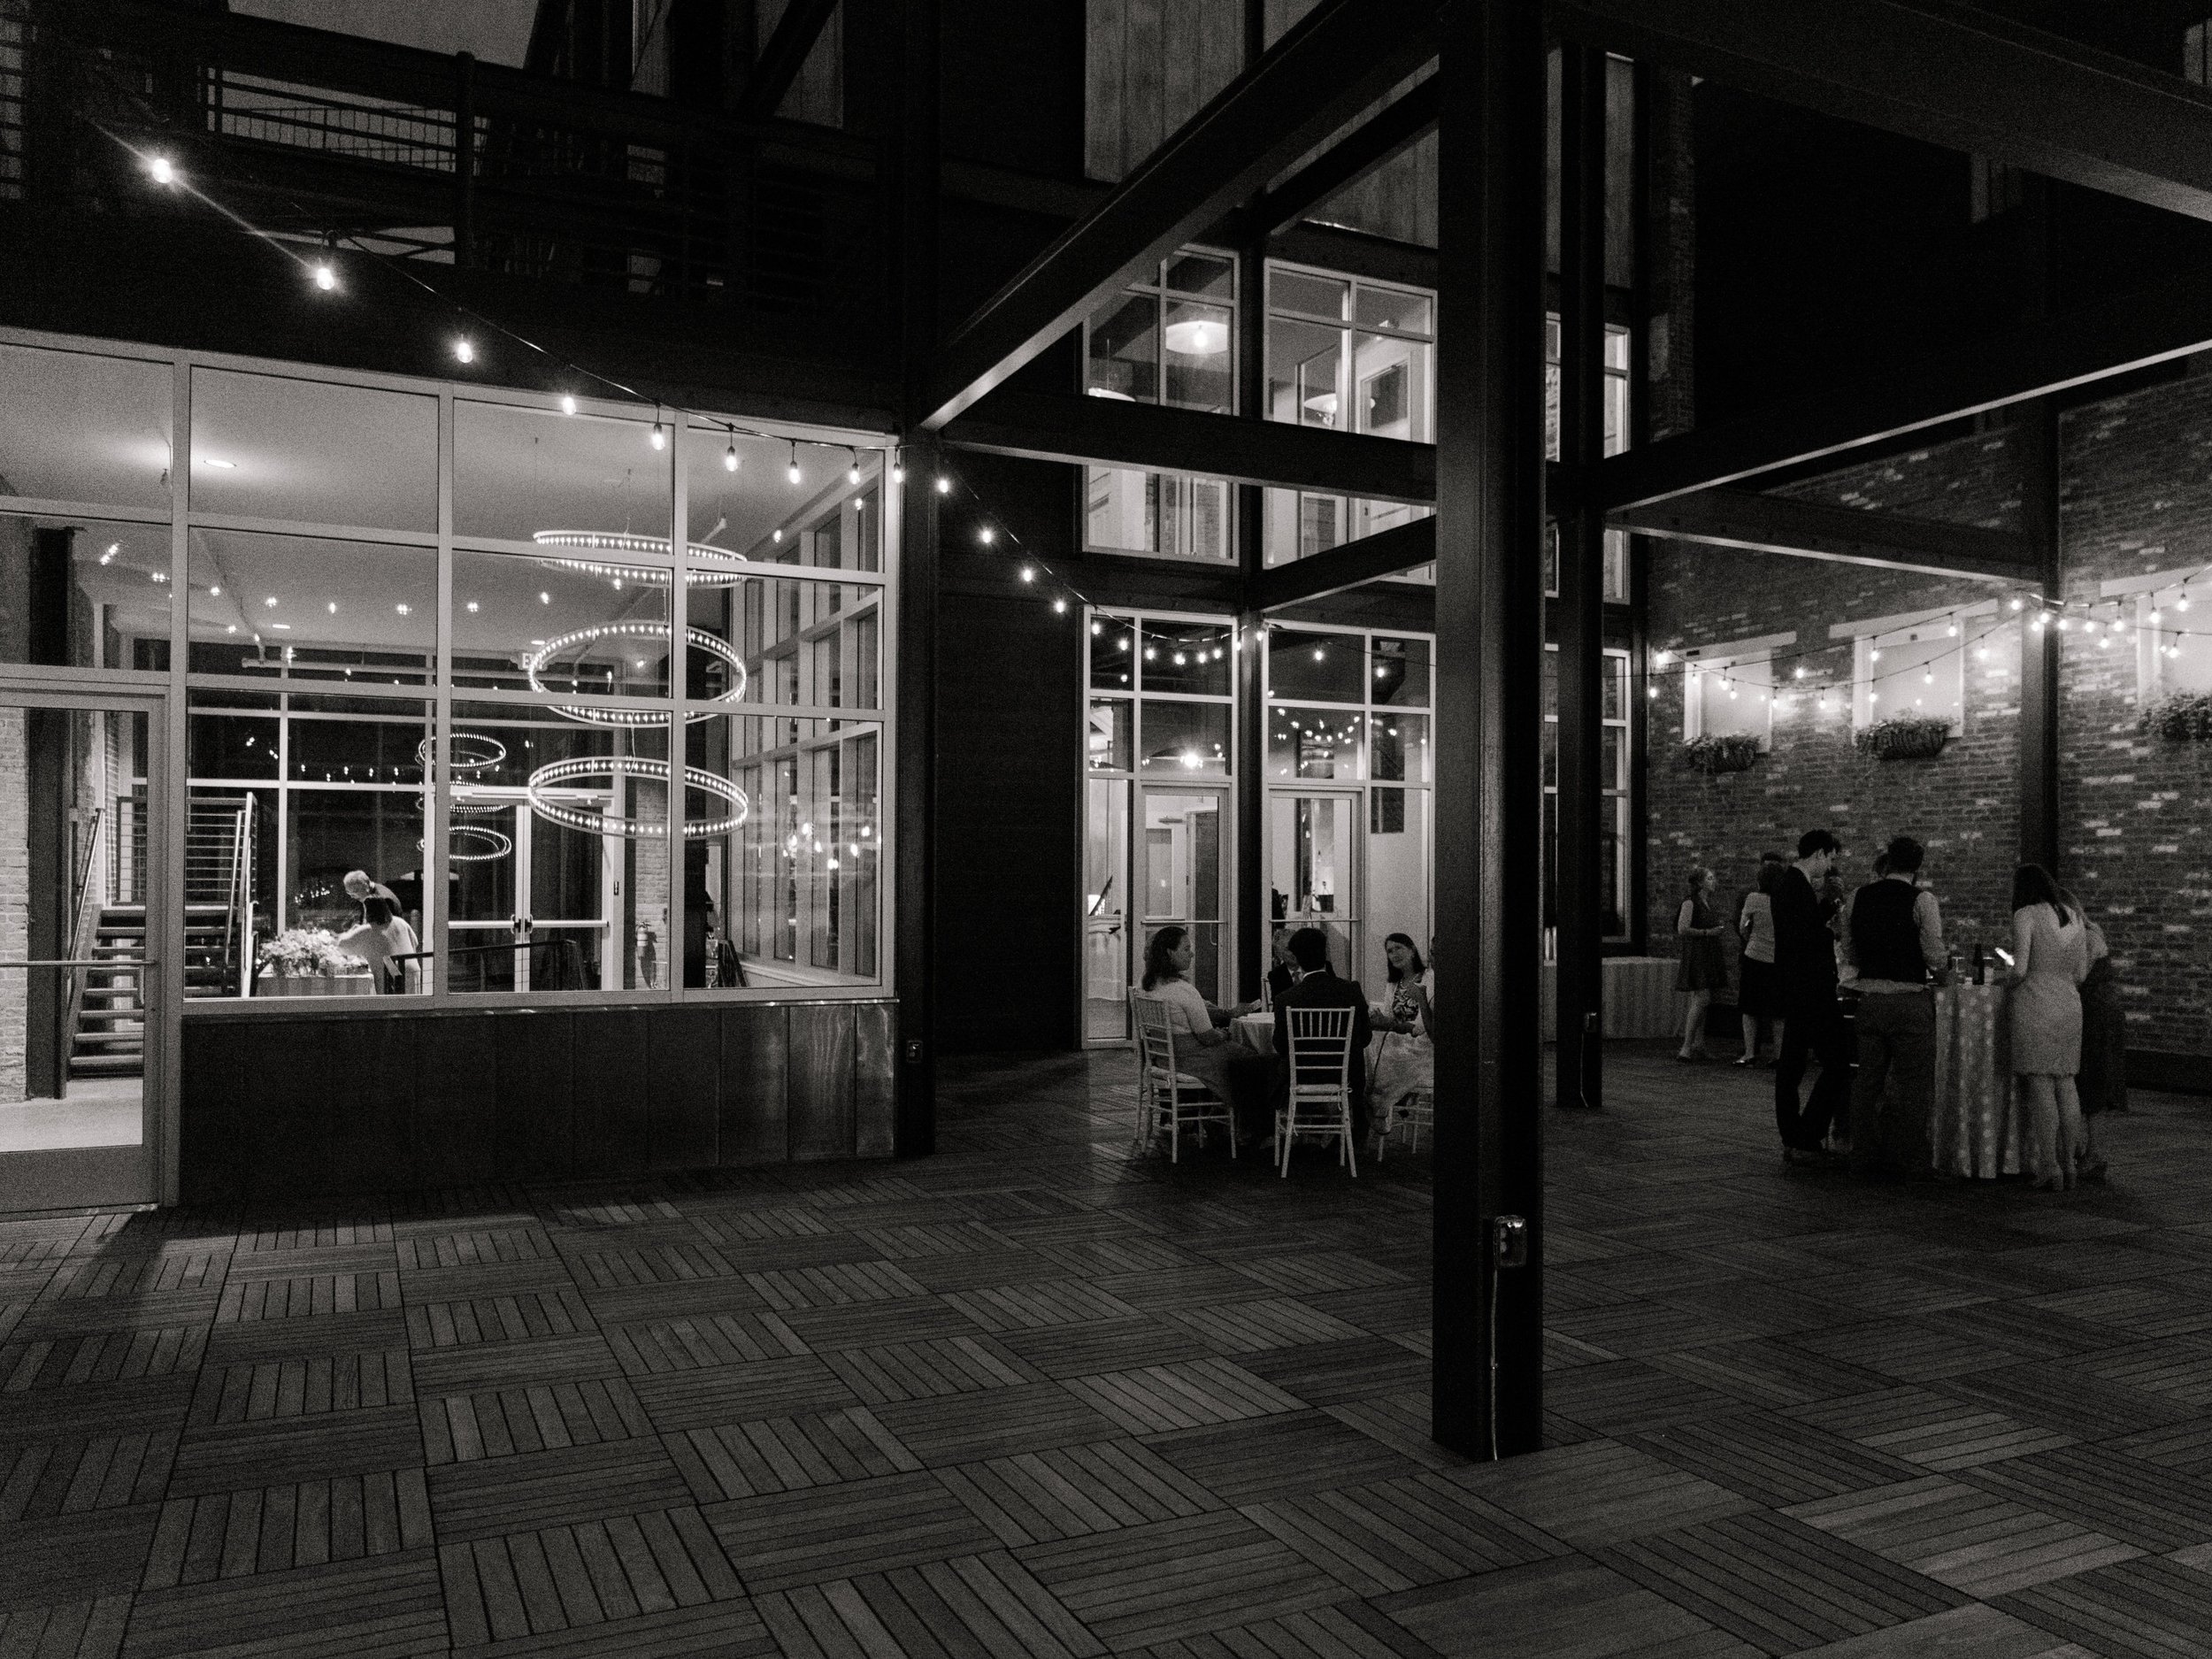 Outdoor patio on Terrace looking into Excelsior building lit up at night black and white